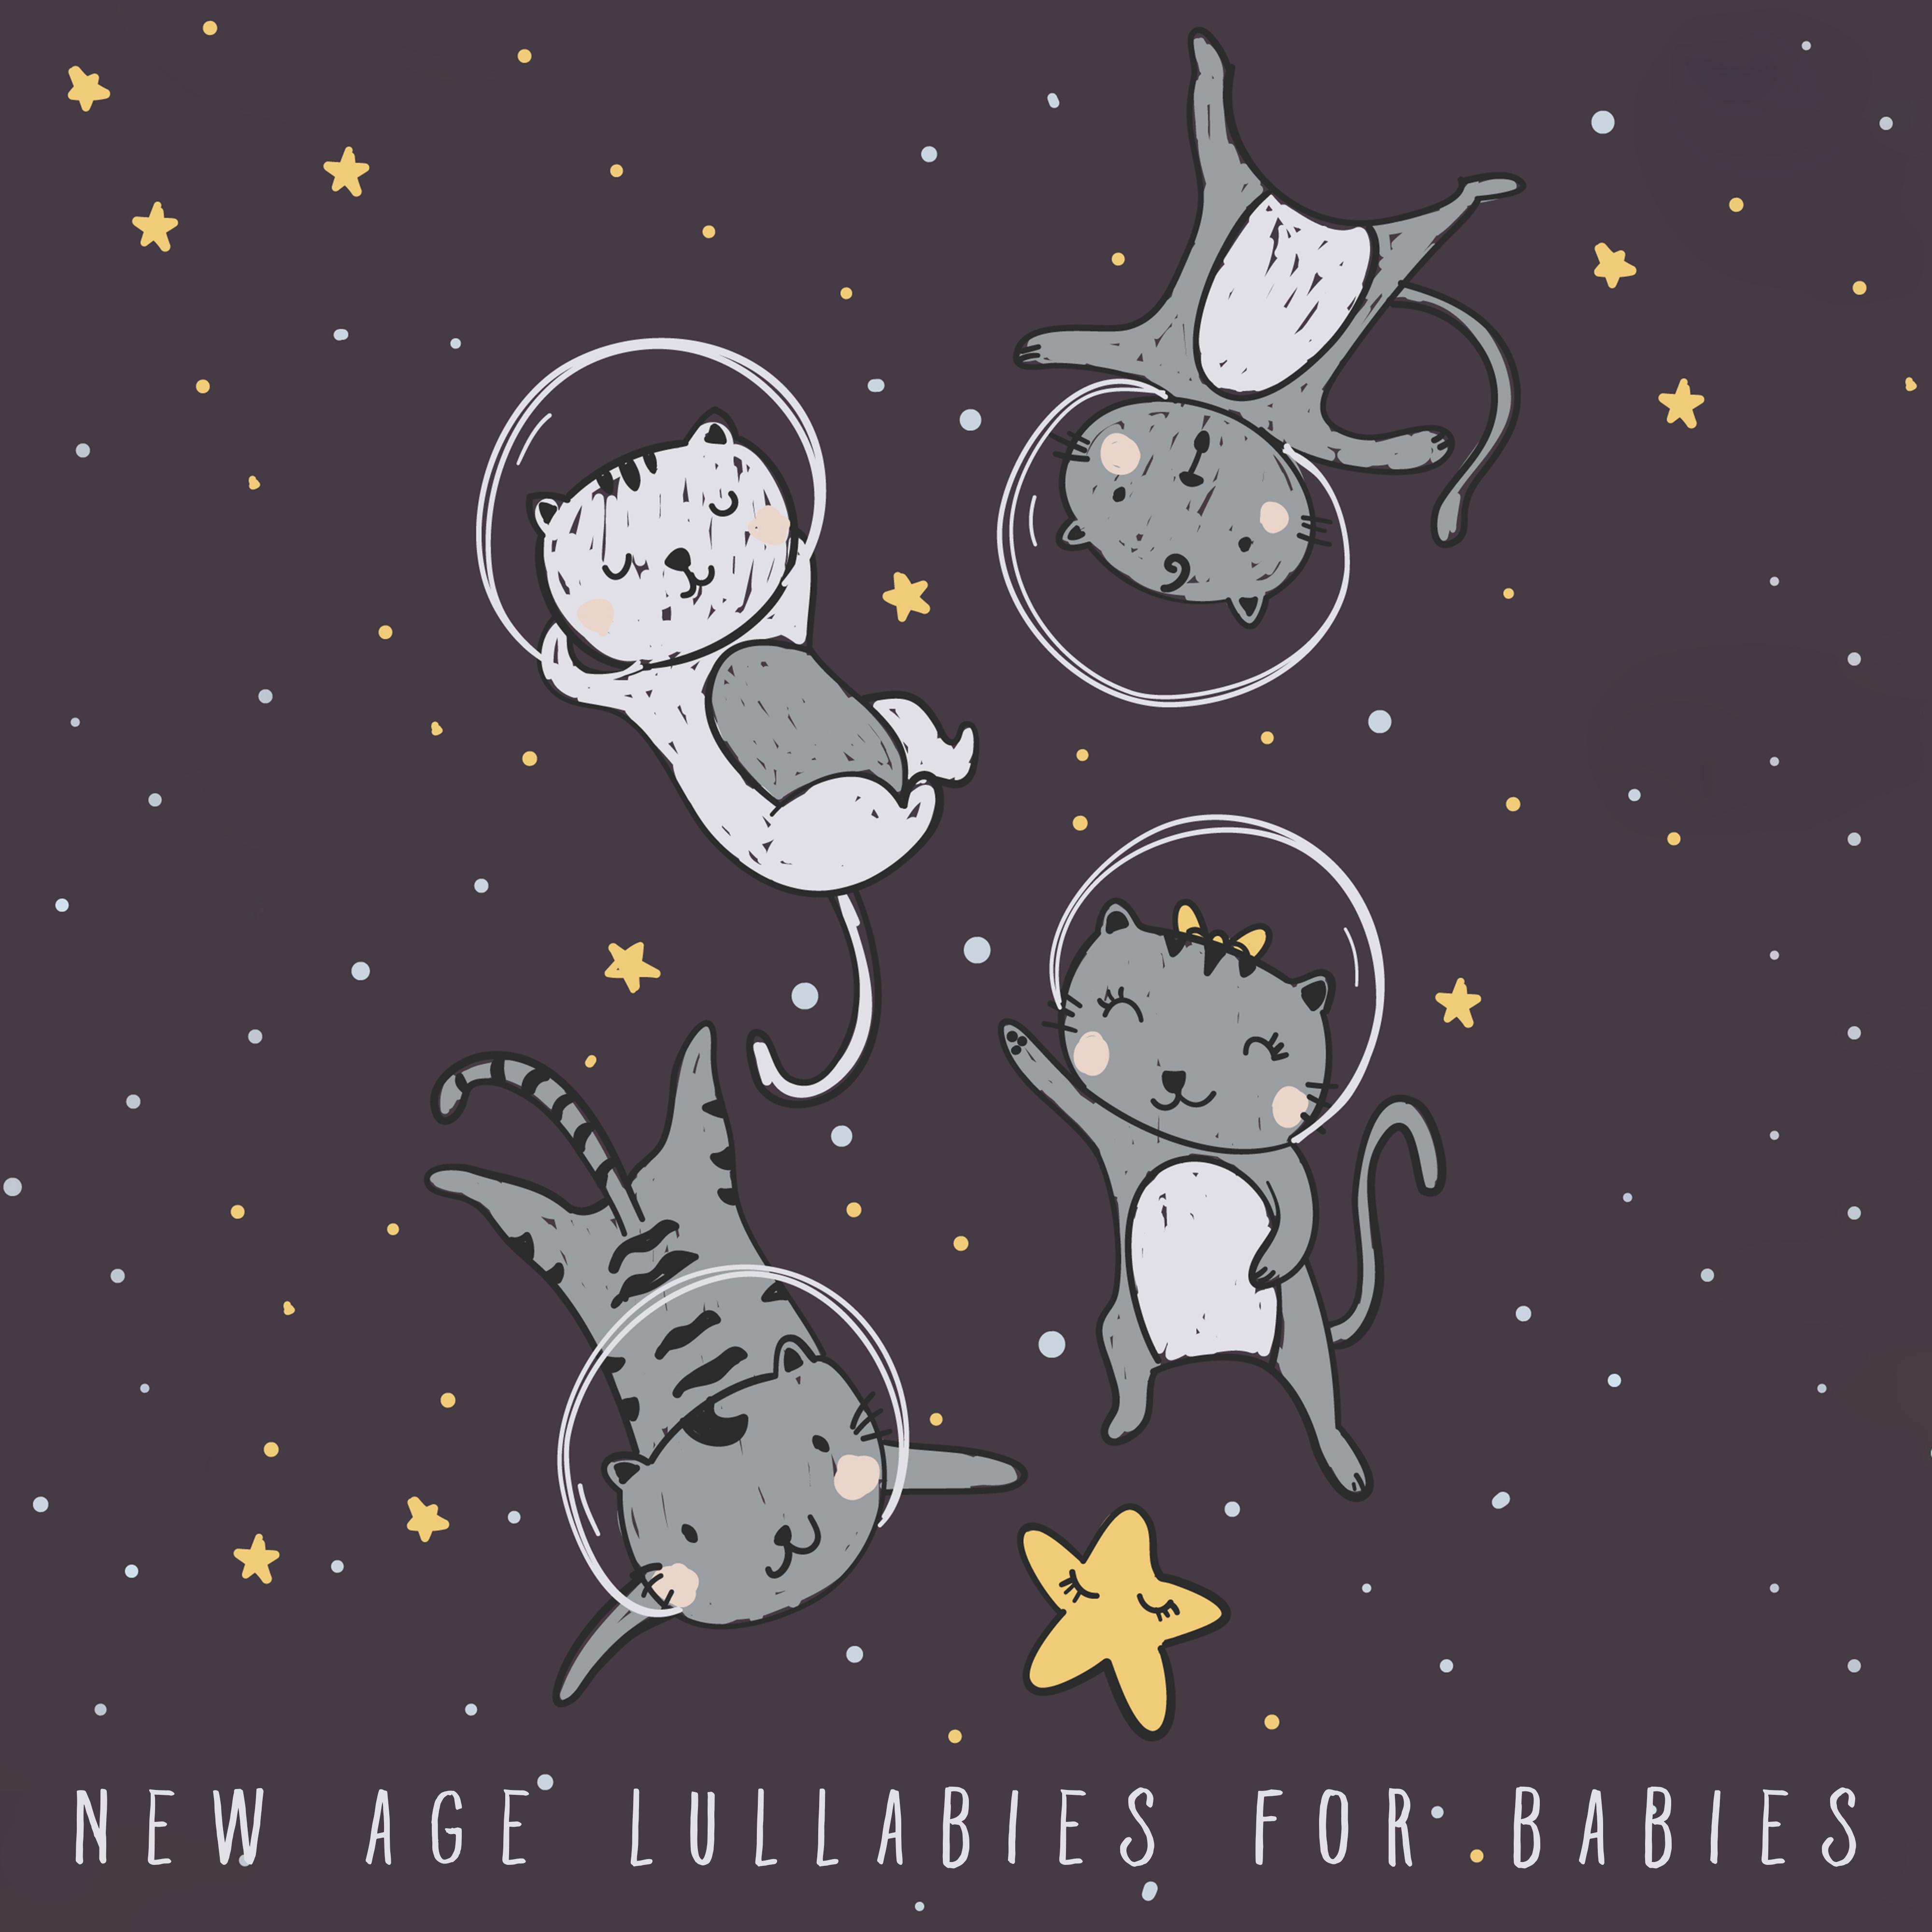 New Age Lullabies for Babies